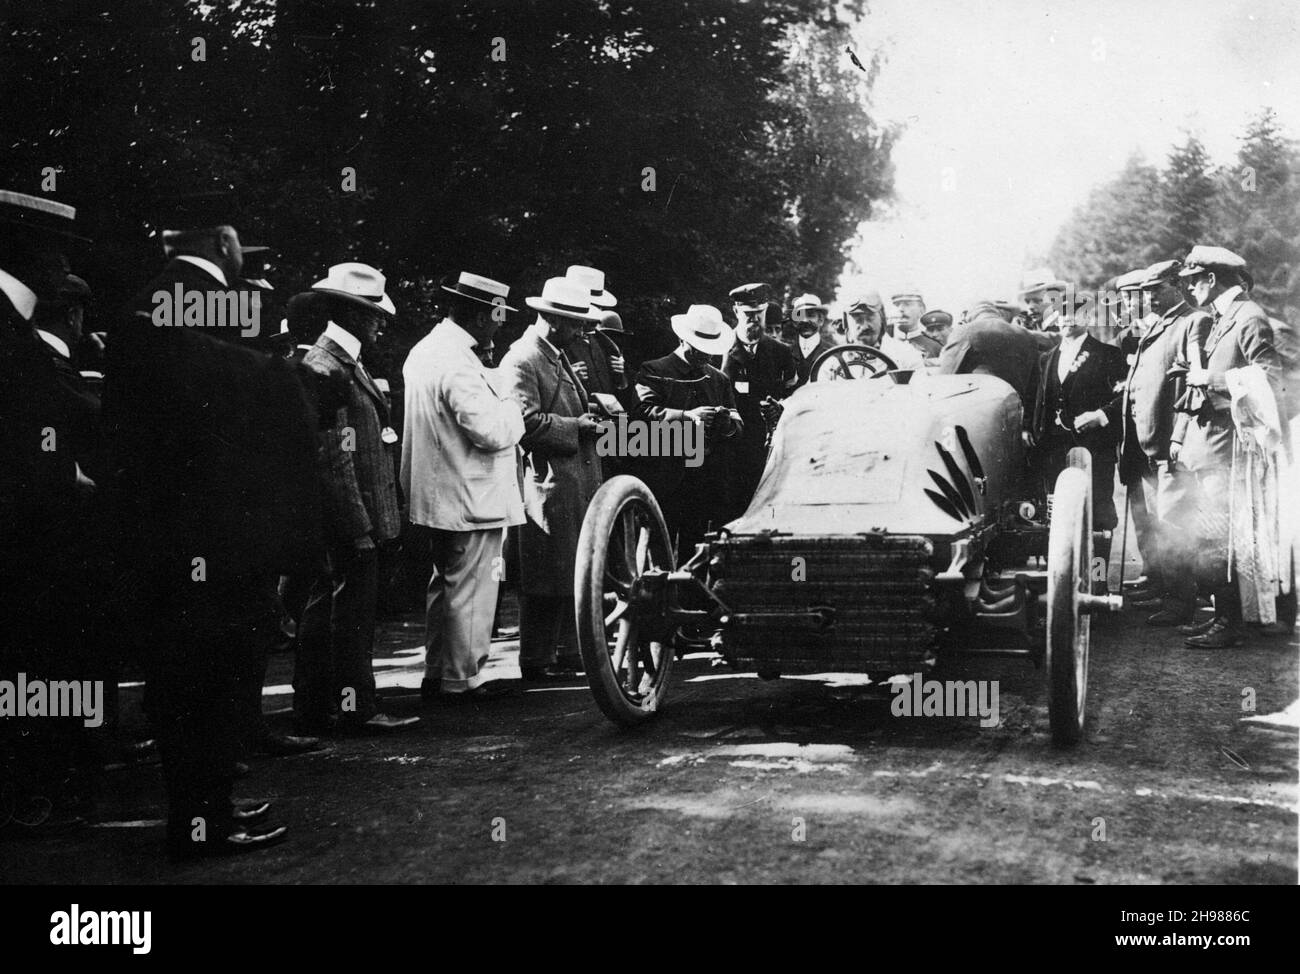 Pipe driven by Belgian racing driver Lucien Hautvast in the 1904 Gordon Bennett Cup at Homburg, Germany. Hautvast finished the race in sixth place. Stock Photo